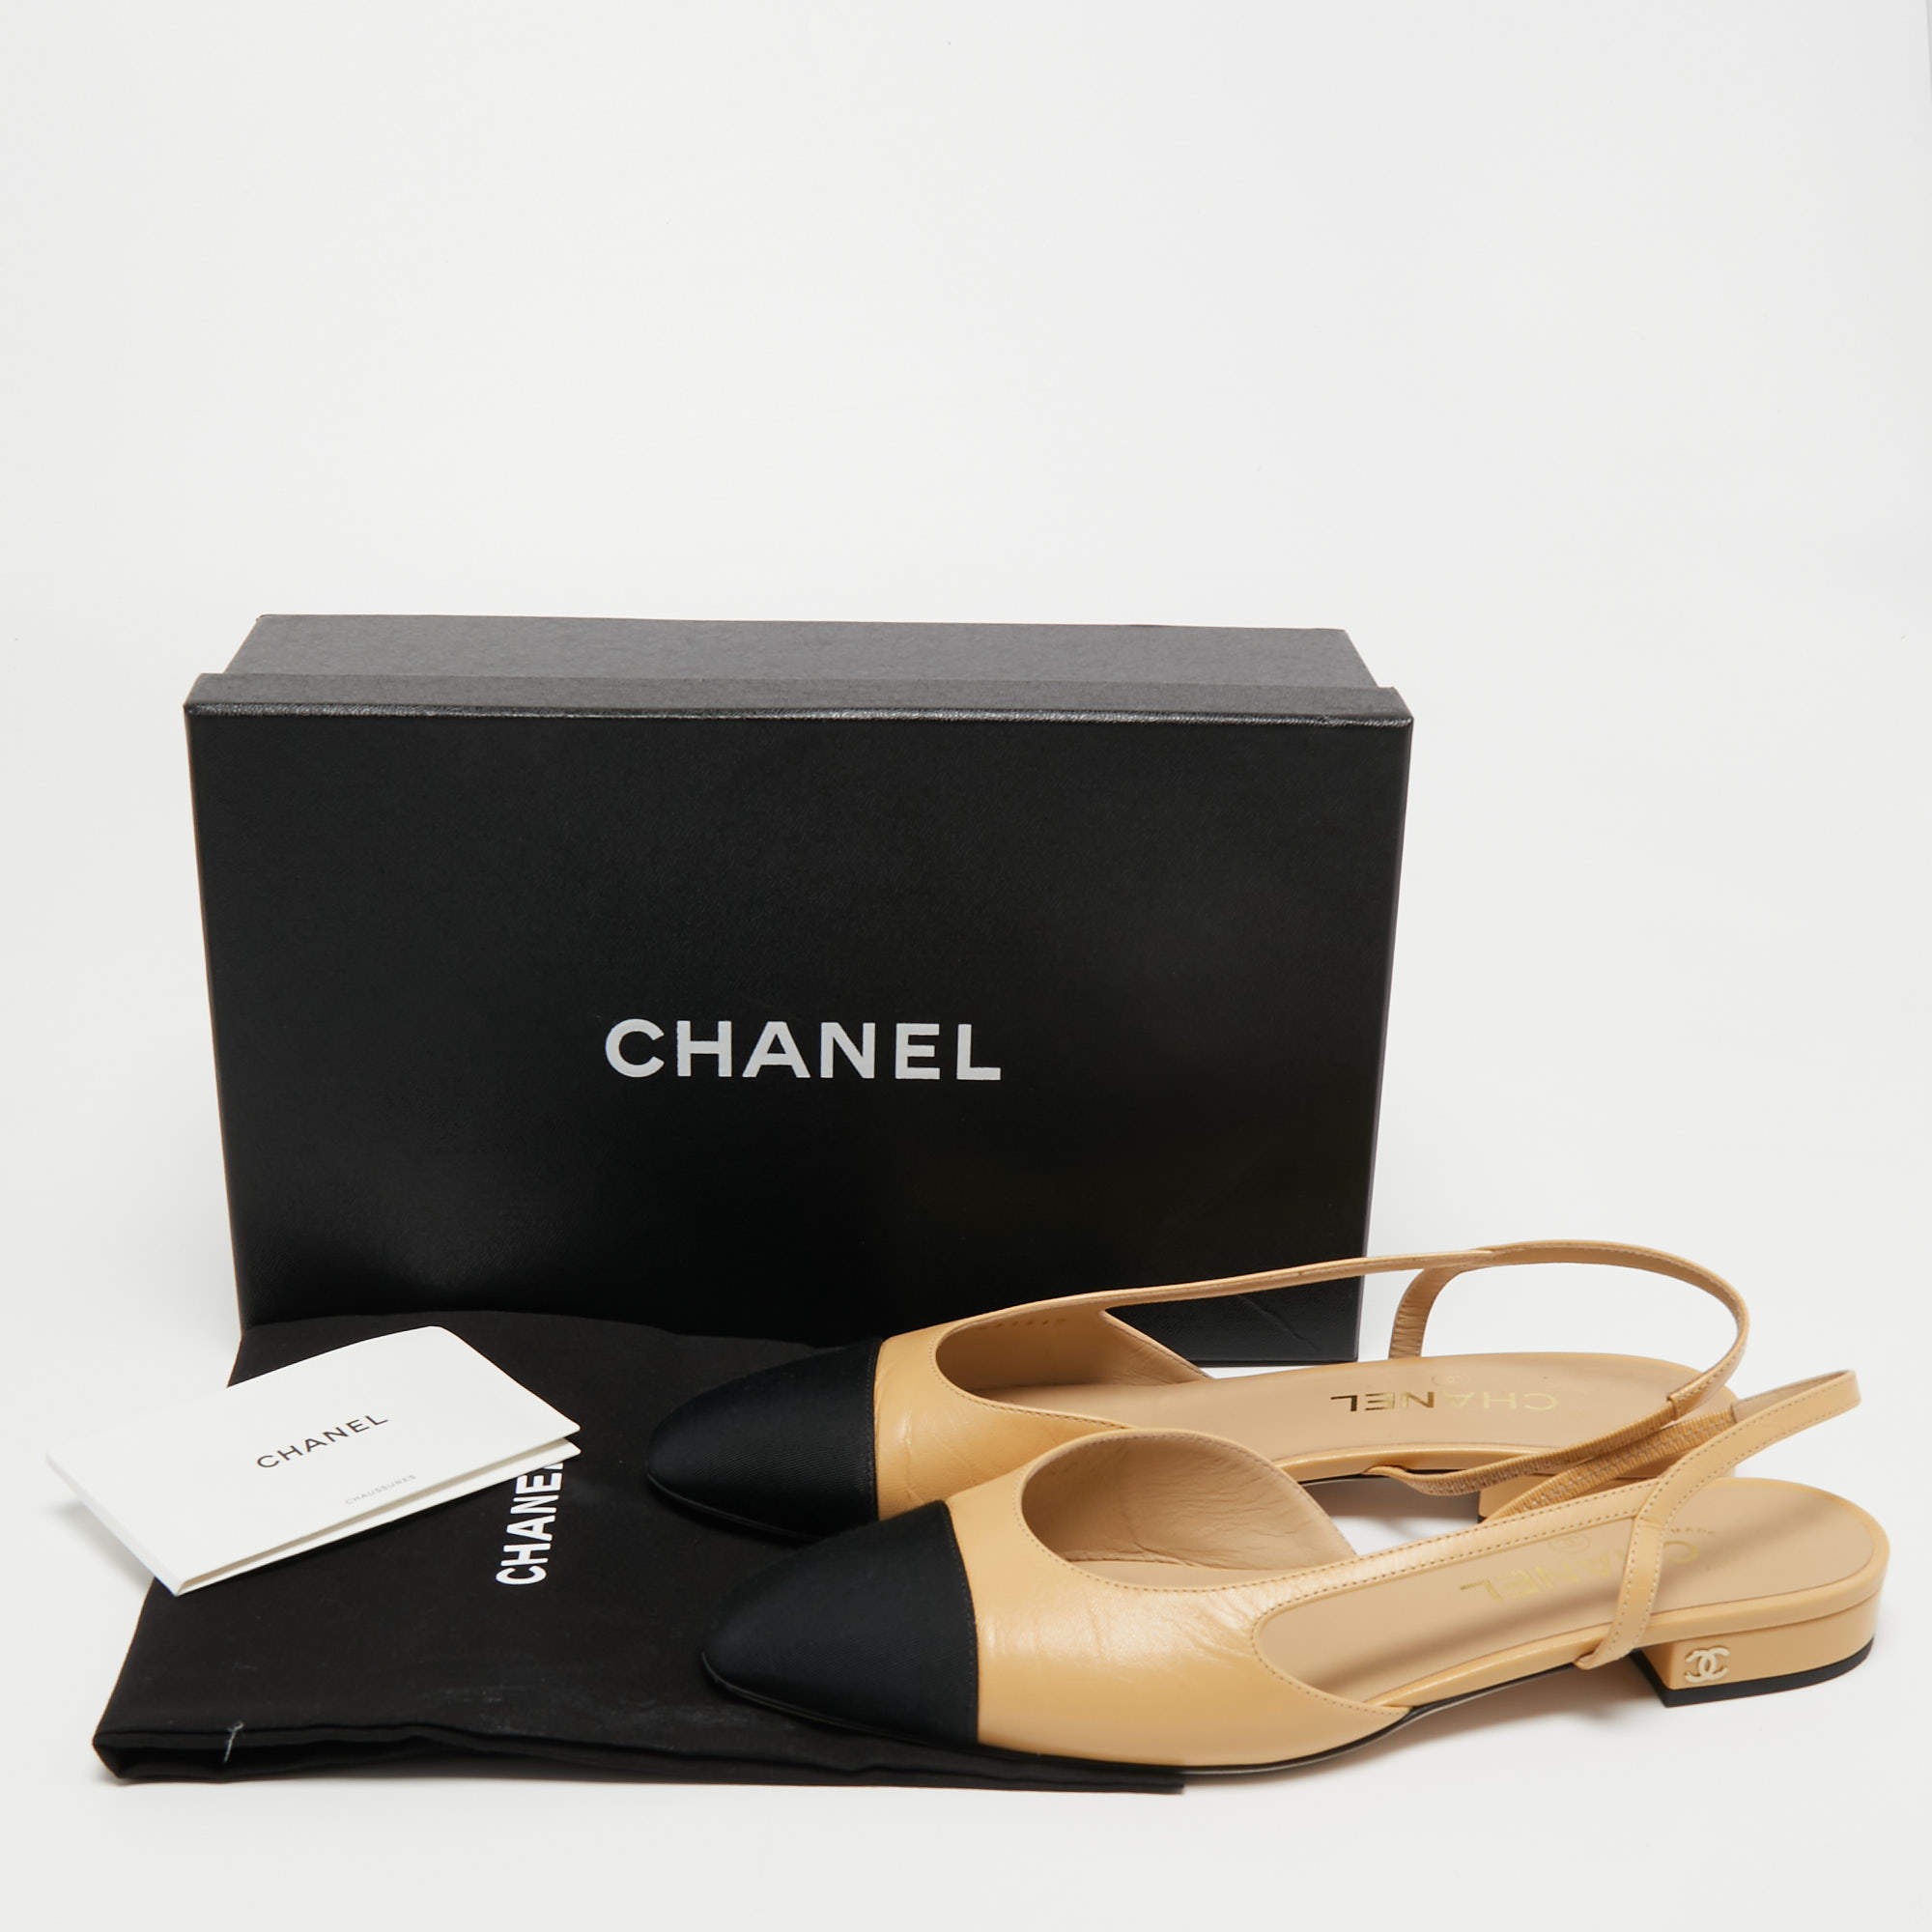 Chanel Beige/Black Leather and Canvas Slingback Flat Sandals Size 39.5  Chanel